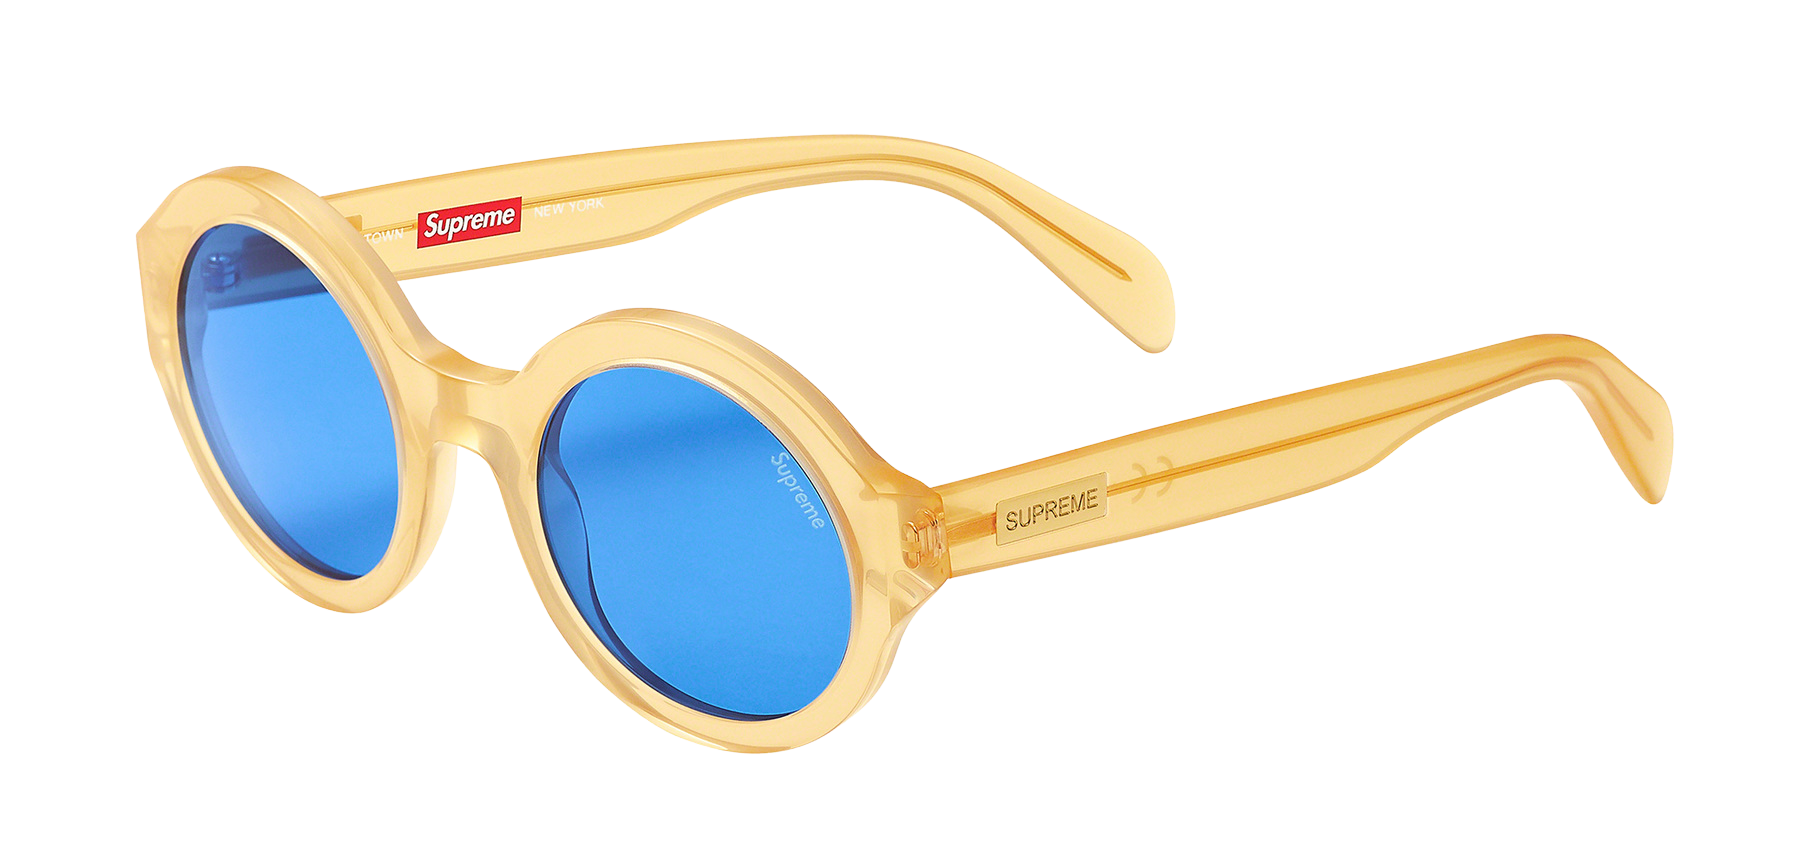 Downtown Sunglasses - spring summer 2021 - Supreme